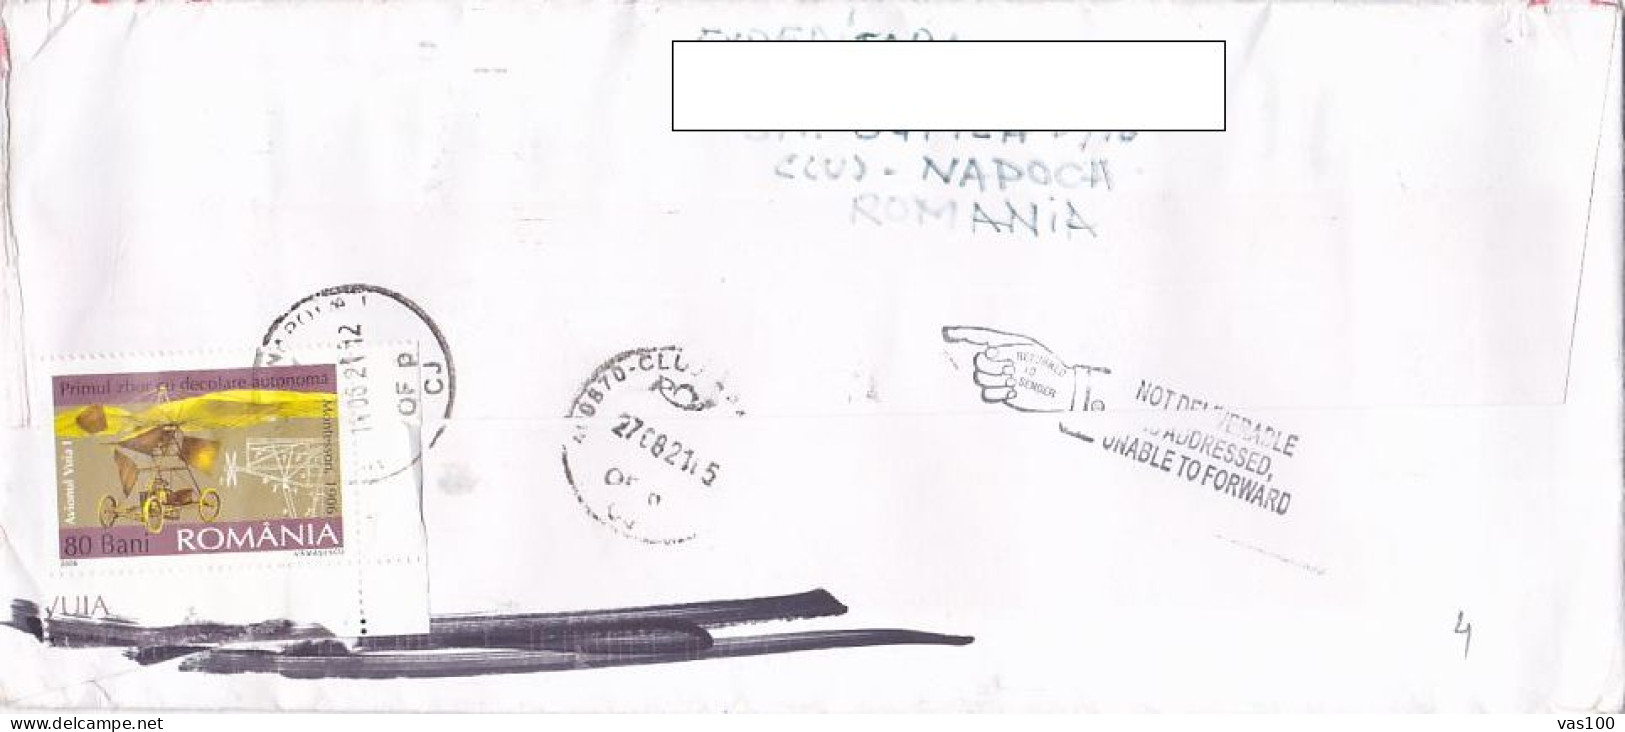 CHRISTOPHER COLUMBUS, DISCOVERY OF AMERICA, PLANE, STAMPS ON REGISTERED COVER, 2021, ROMANIA - Covers & Documents